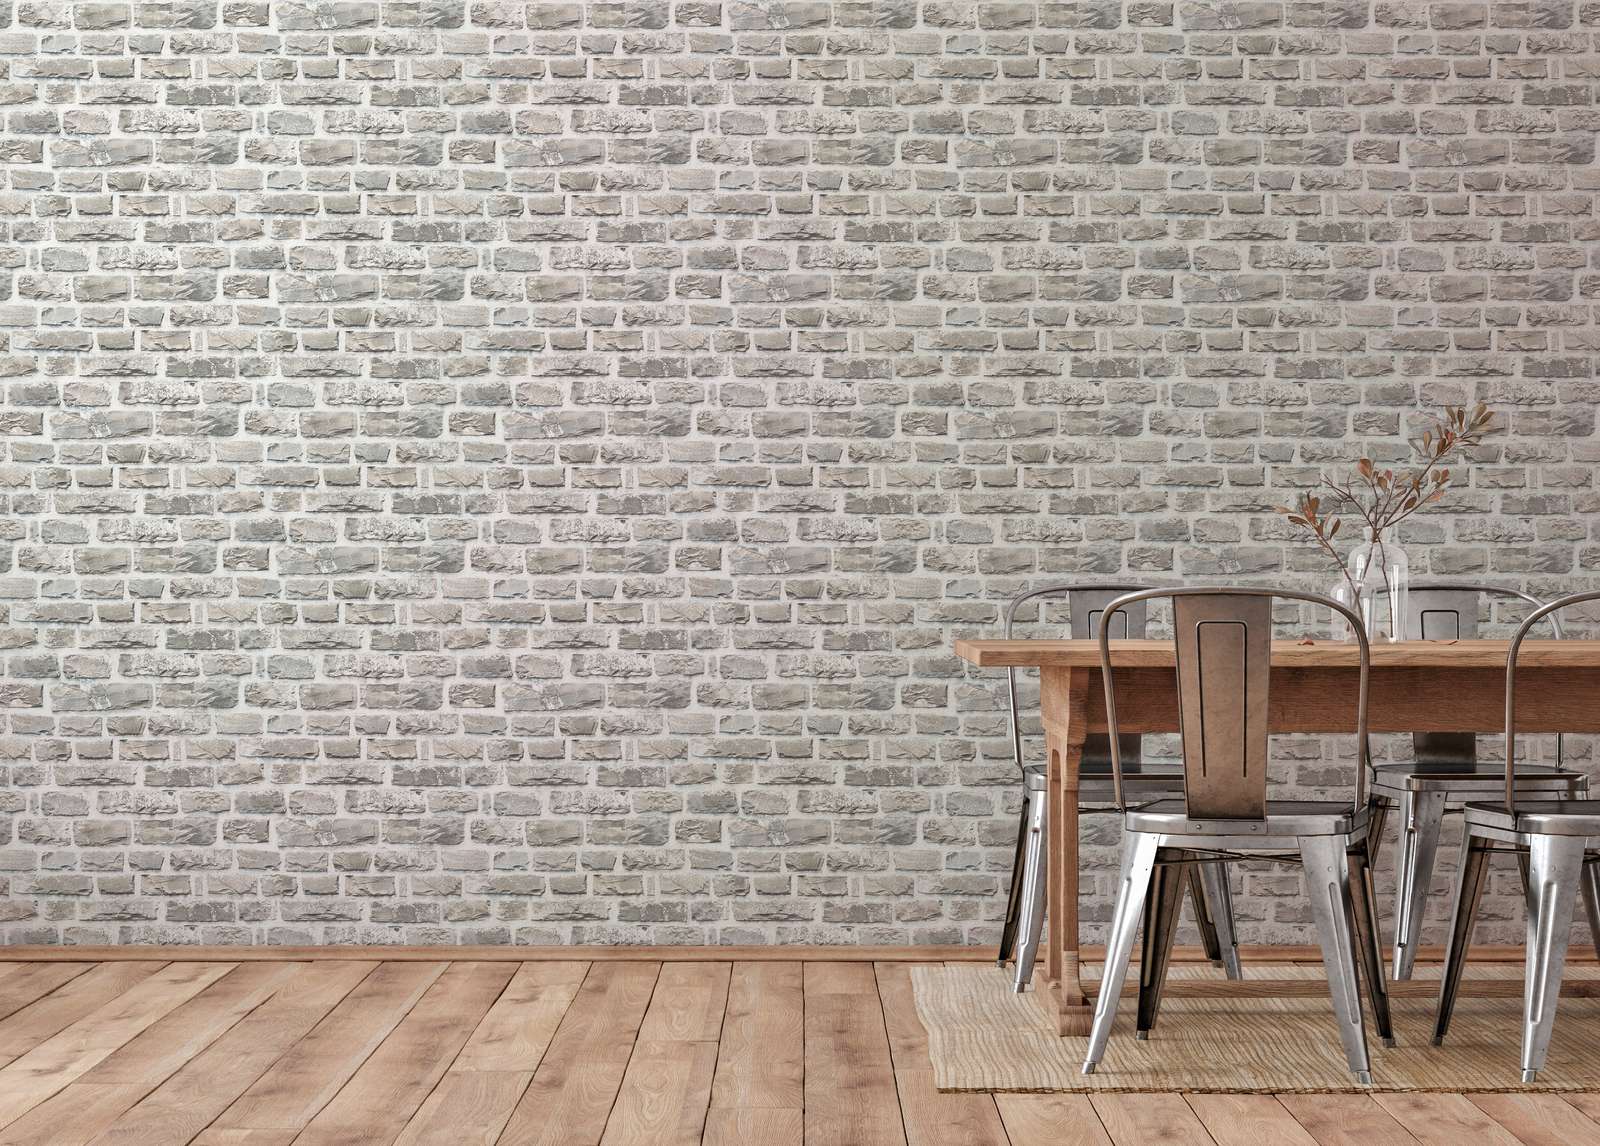             Wallpaper in stone look with quarry stones, natural stone - beige, grey
        